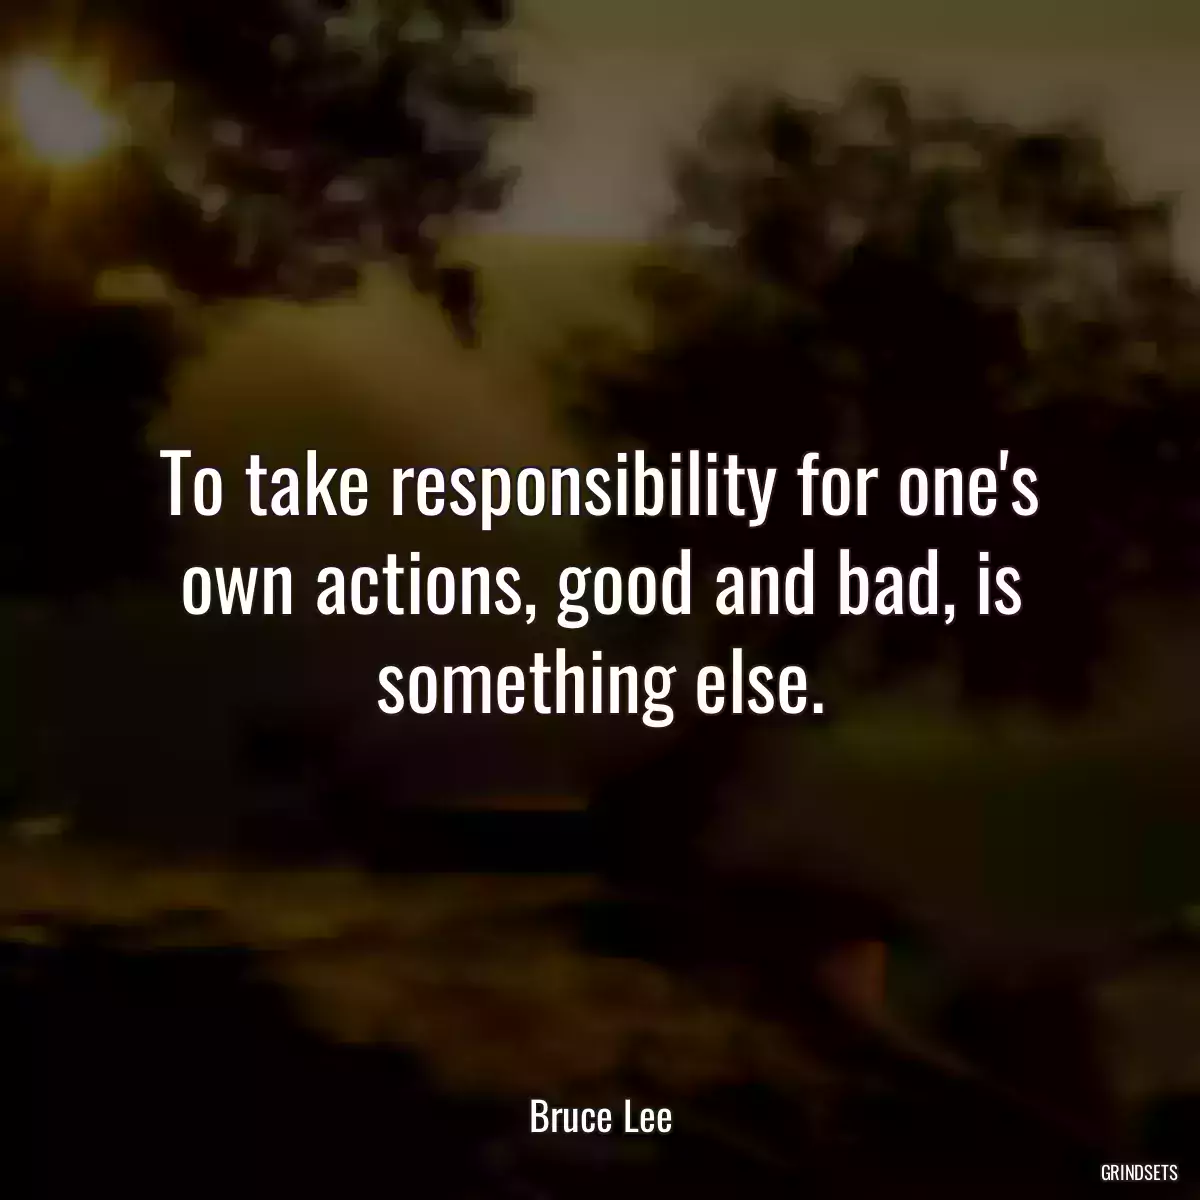 To take responsibility for one\'s own actions, good and bad, is something else.